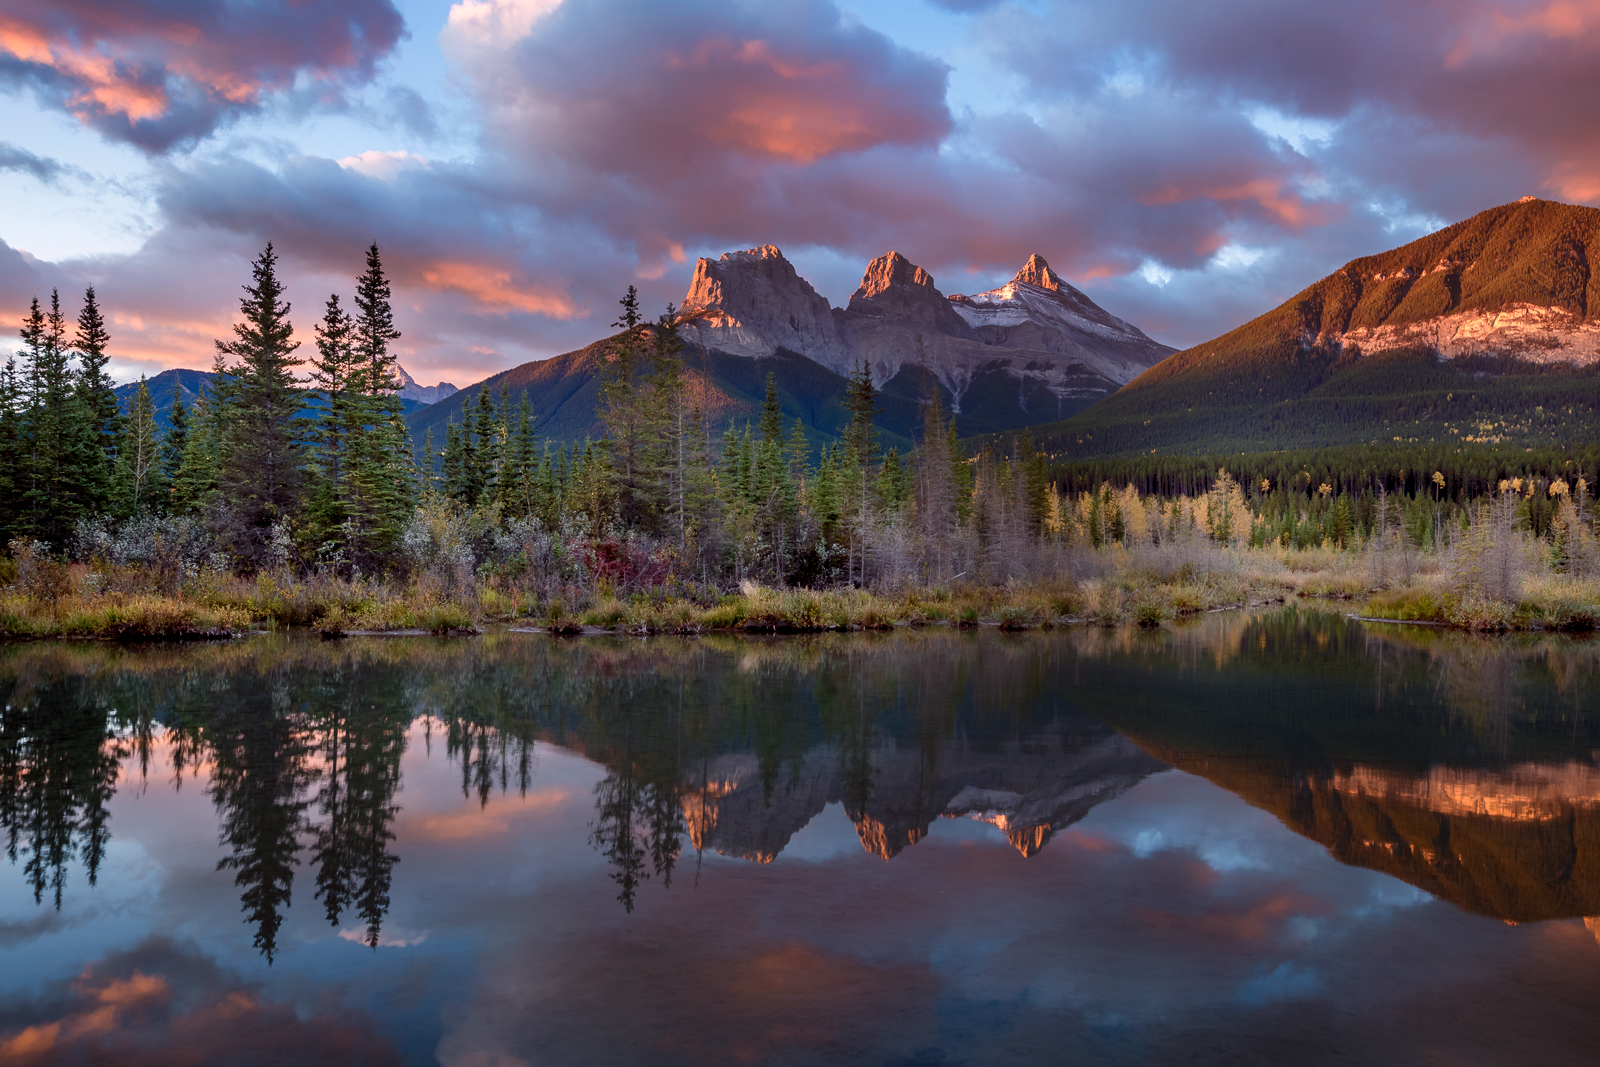 Three Sister's sunrise; the Canadian Rockies Photography Workshop. 